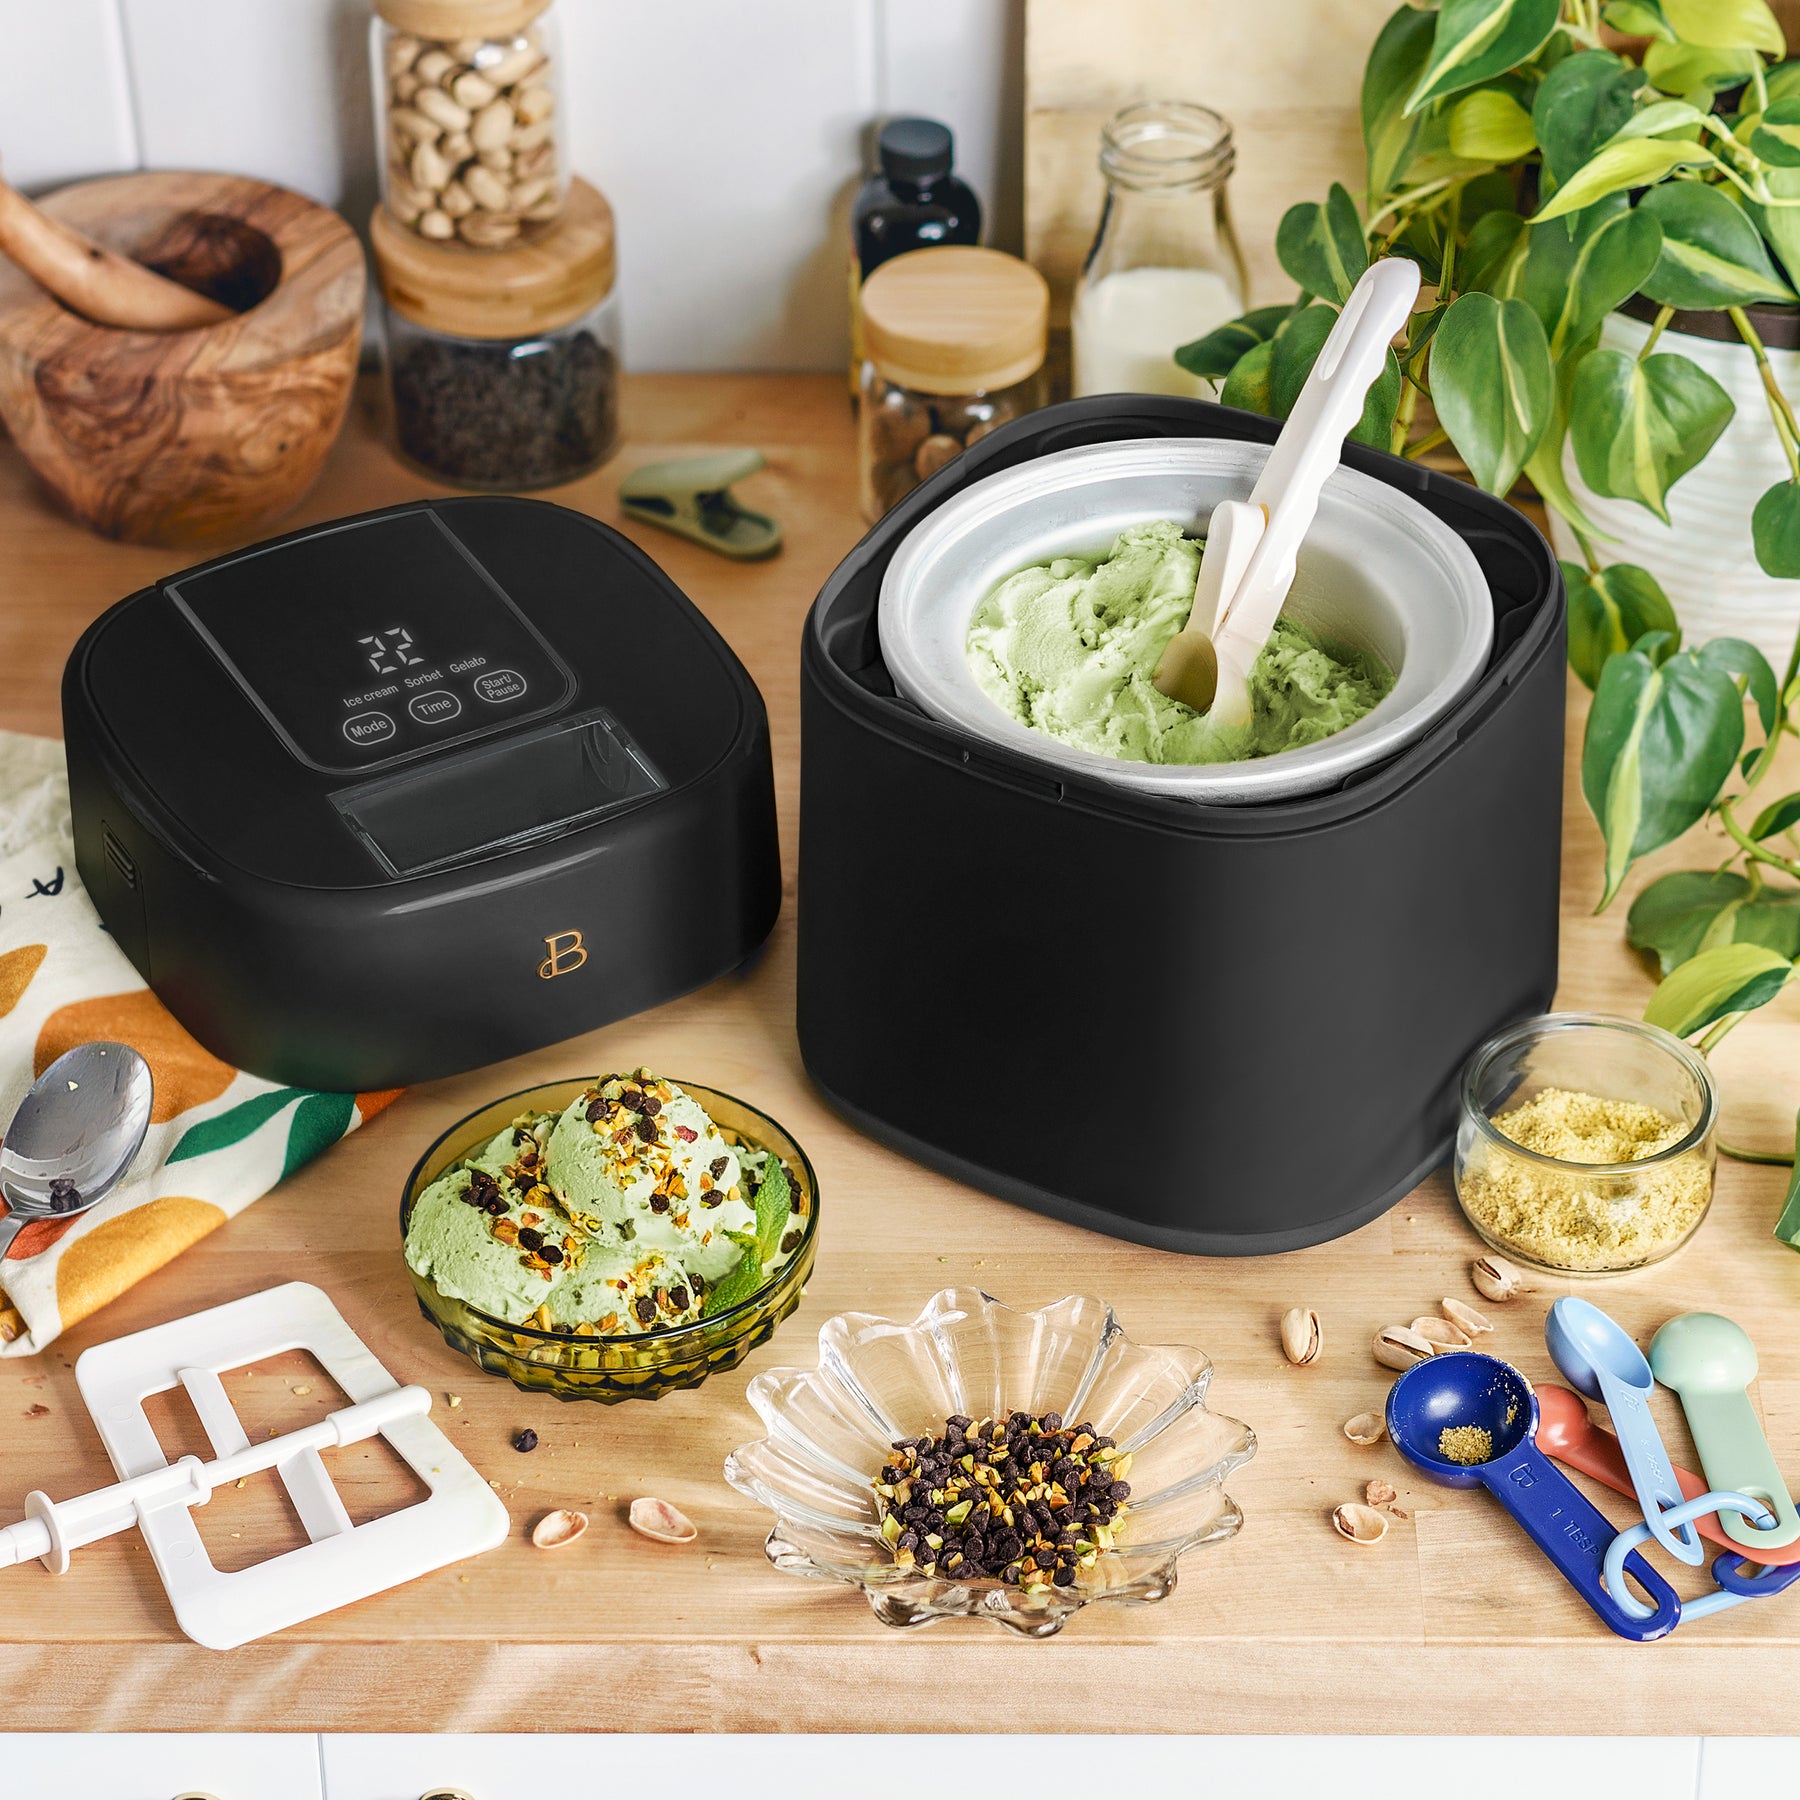 New Magic Personal Ice Cream Maker As Seen On TV Shake To Make Ice